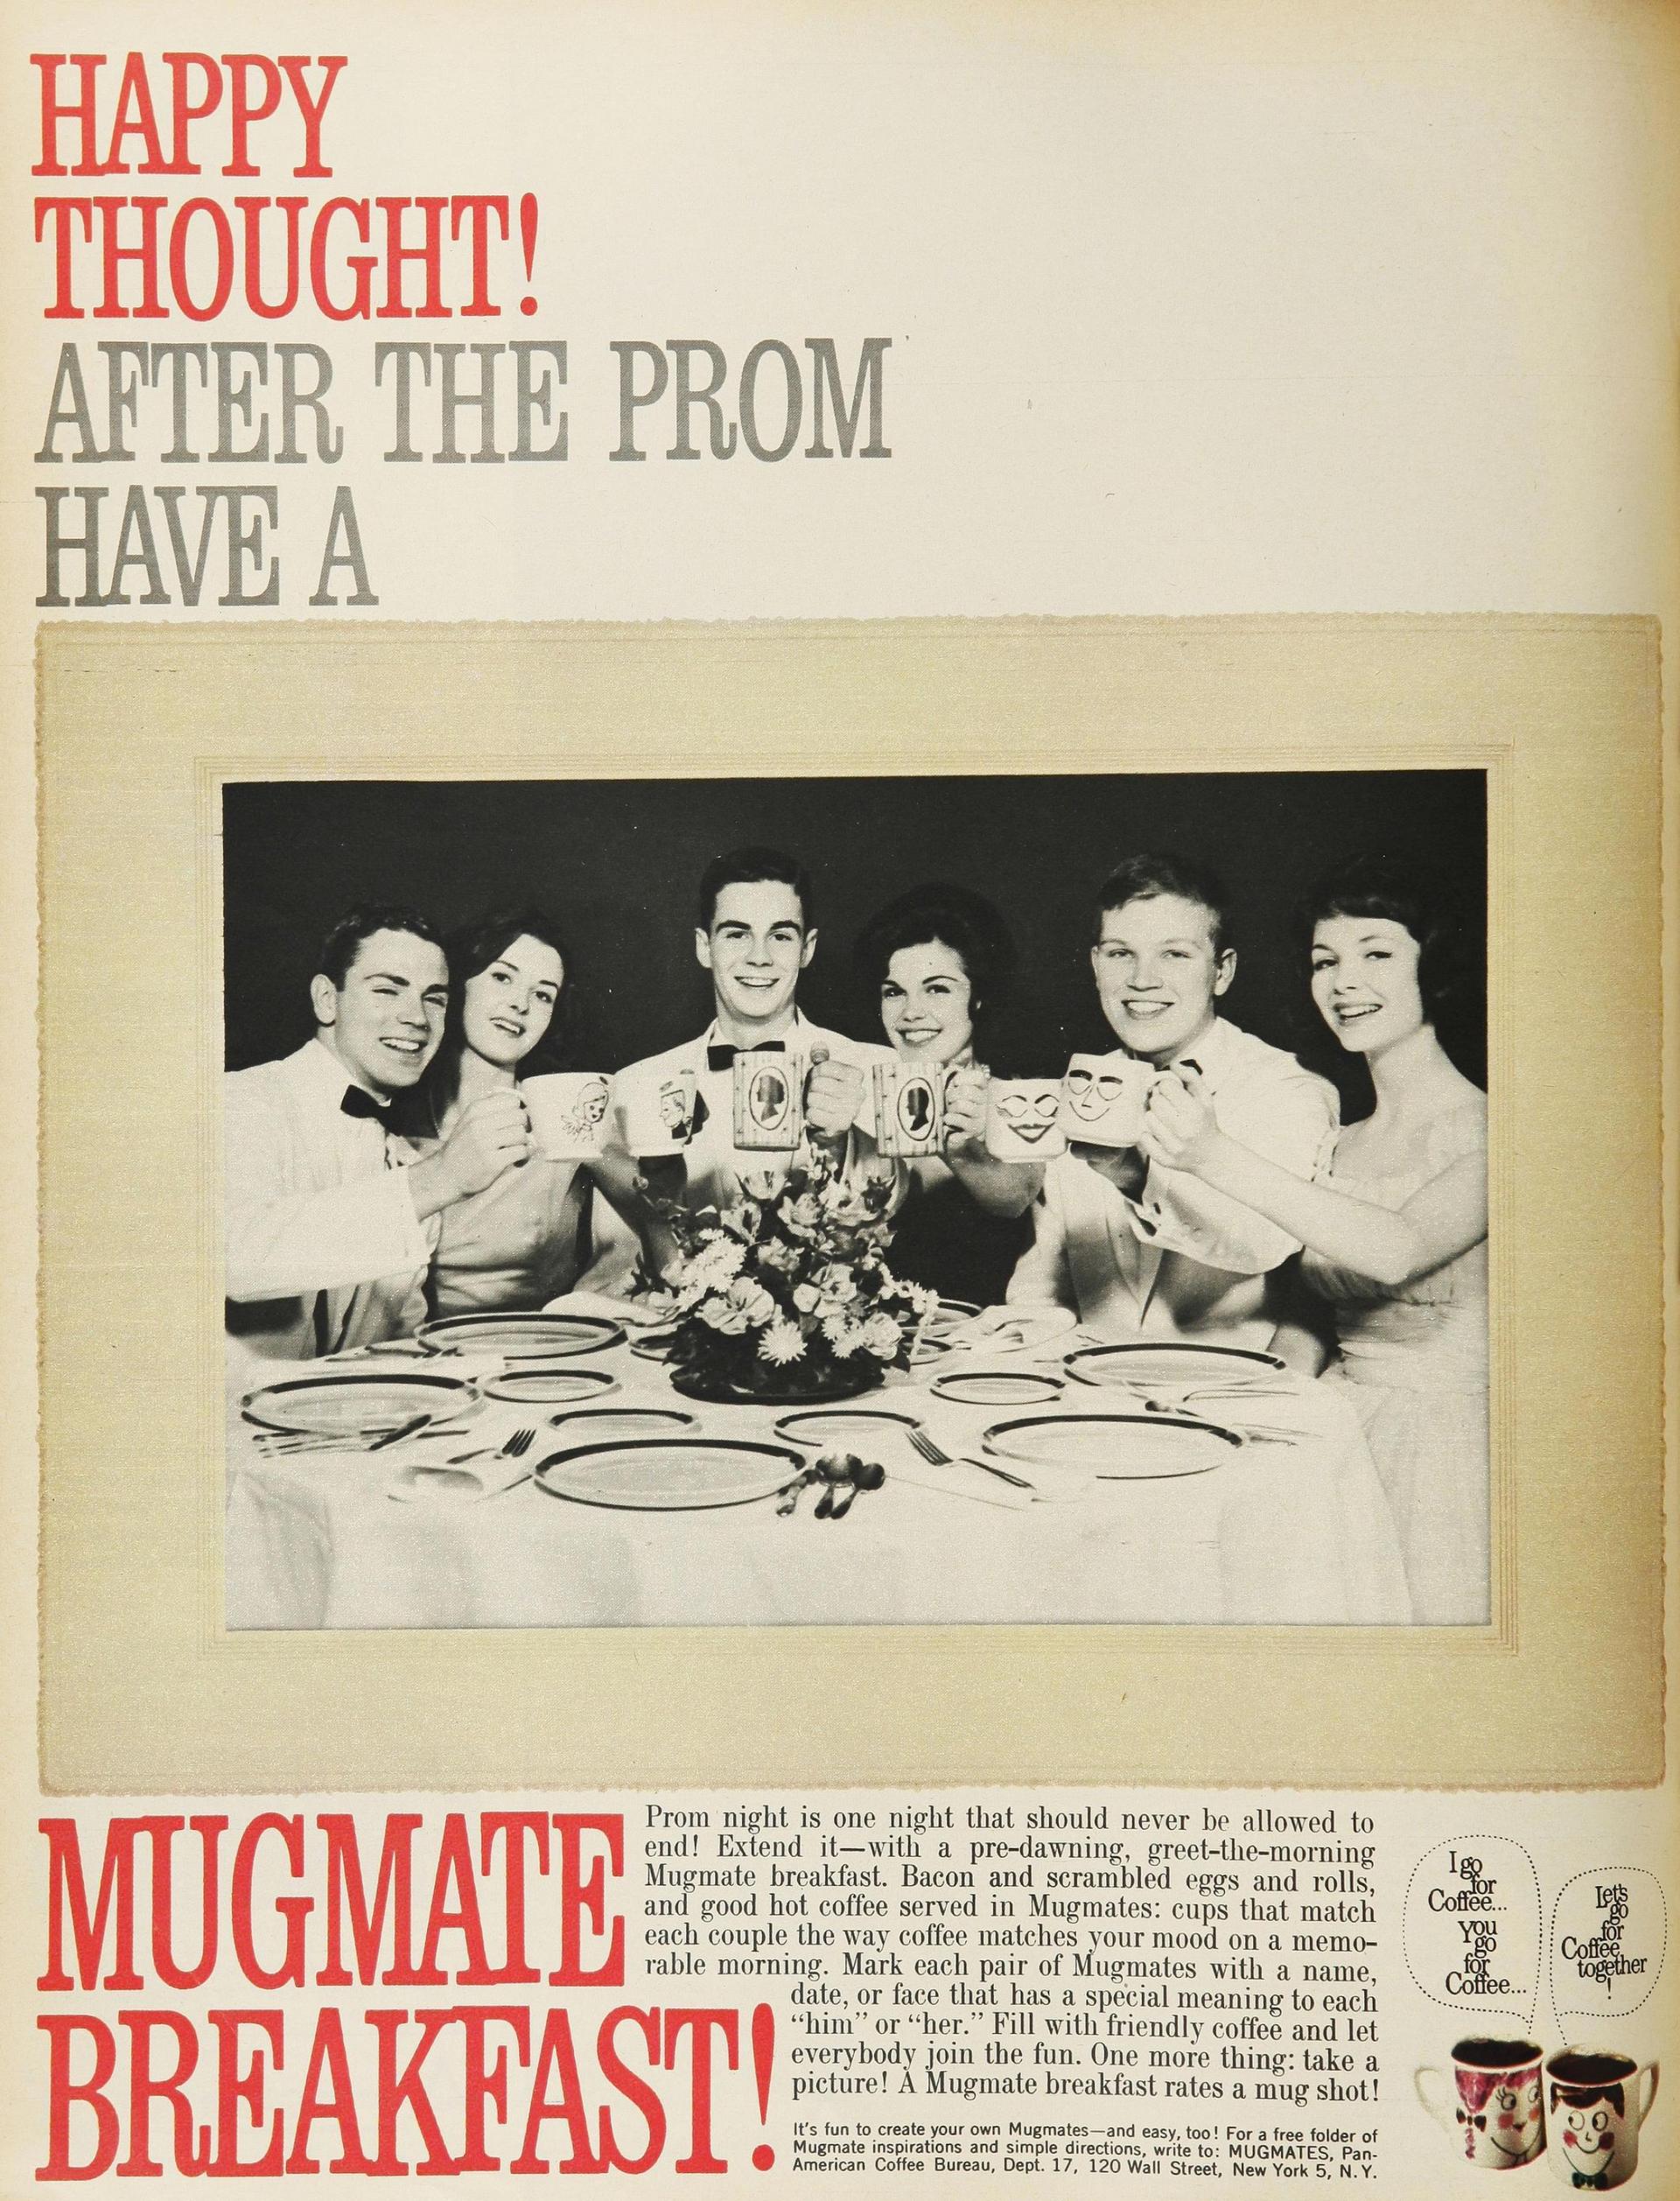 A magazine advertisement for the “Mugmates” campaign from May 1962.